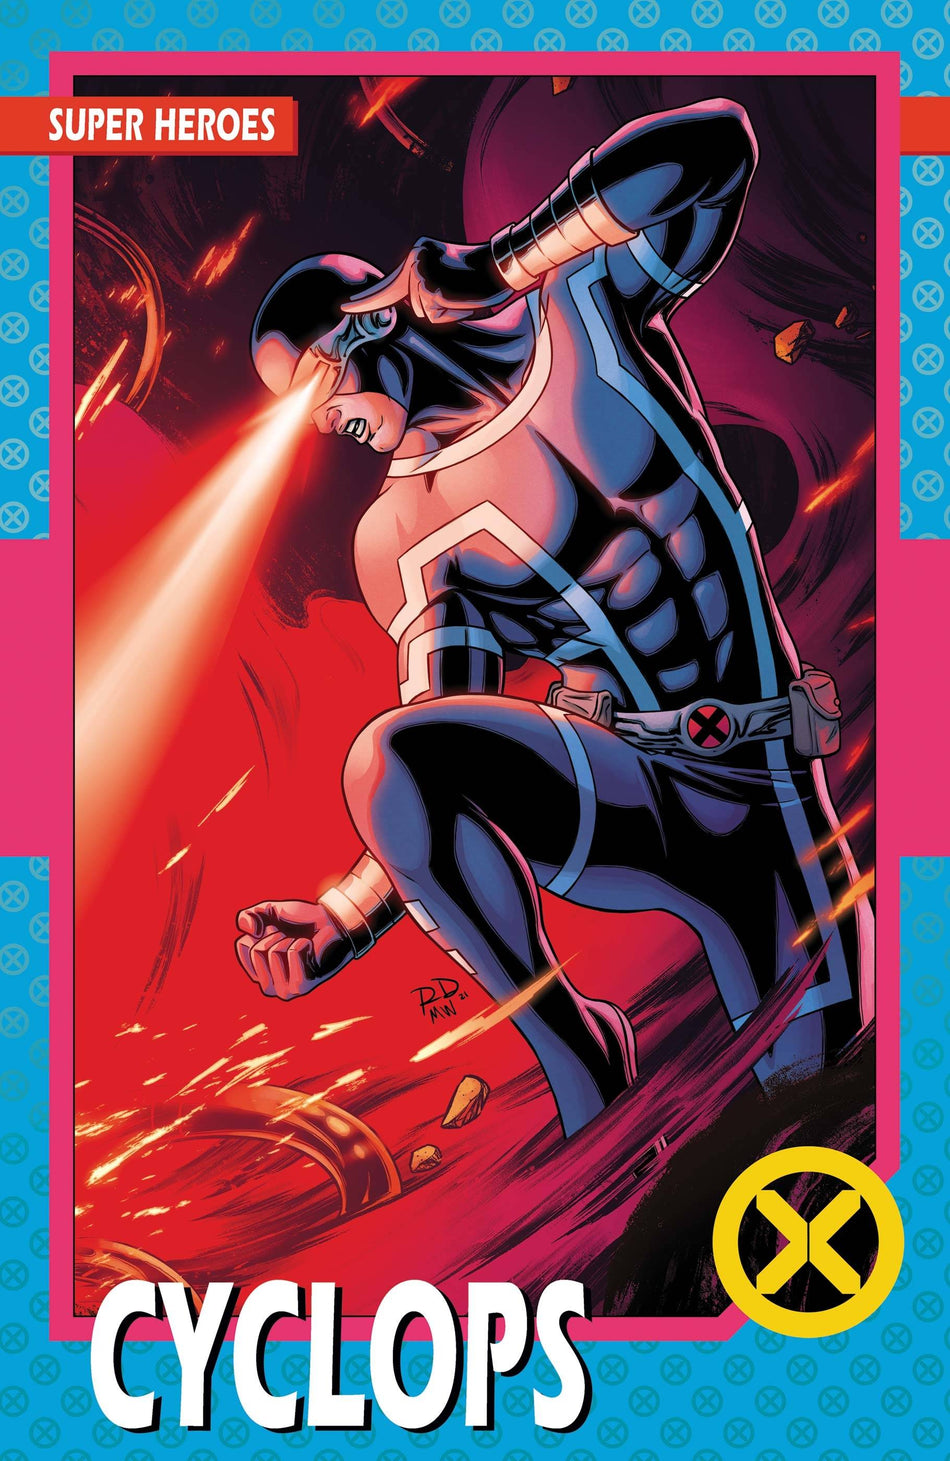 Photo of X-Men Issue 1 Dauterman New Line Up Trading Card Var comic sold by Stronghold Collectibles